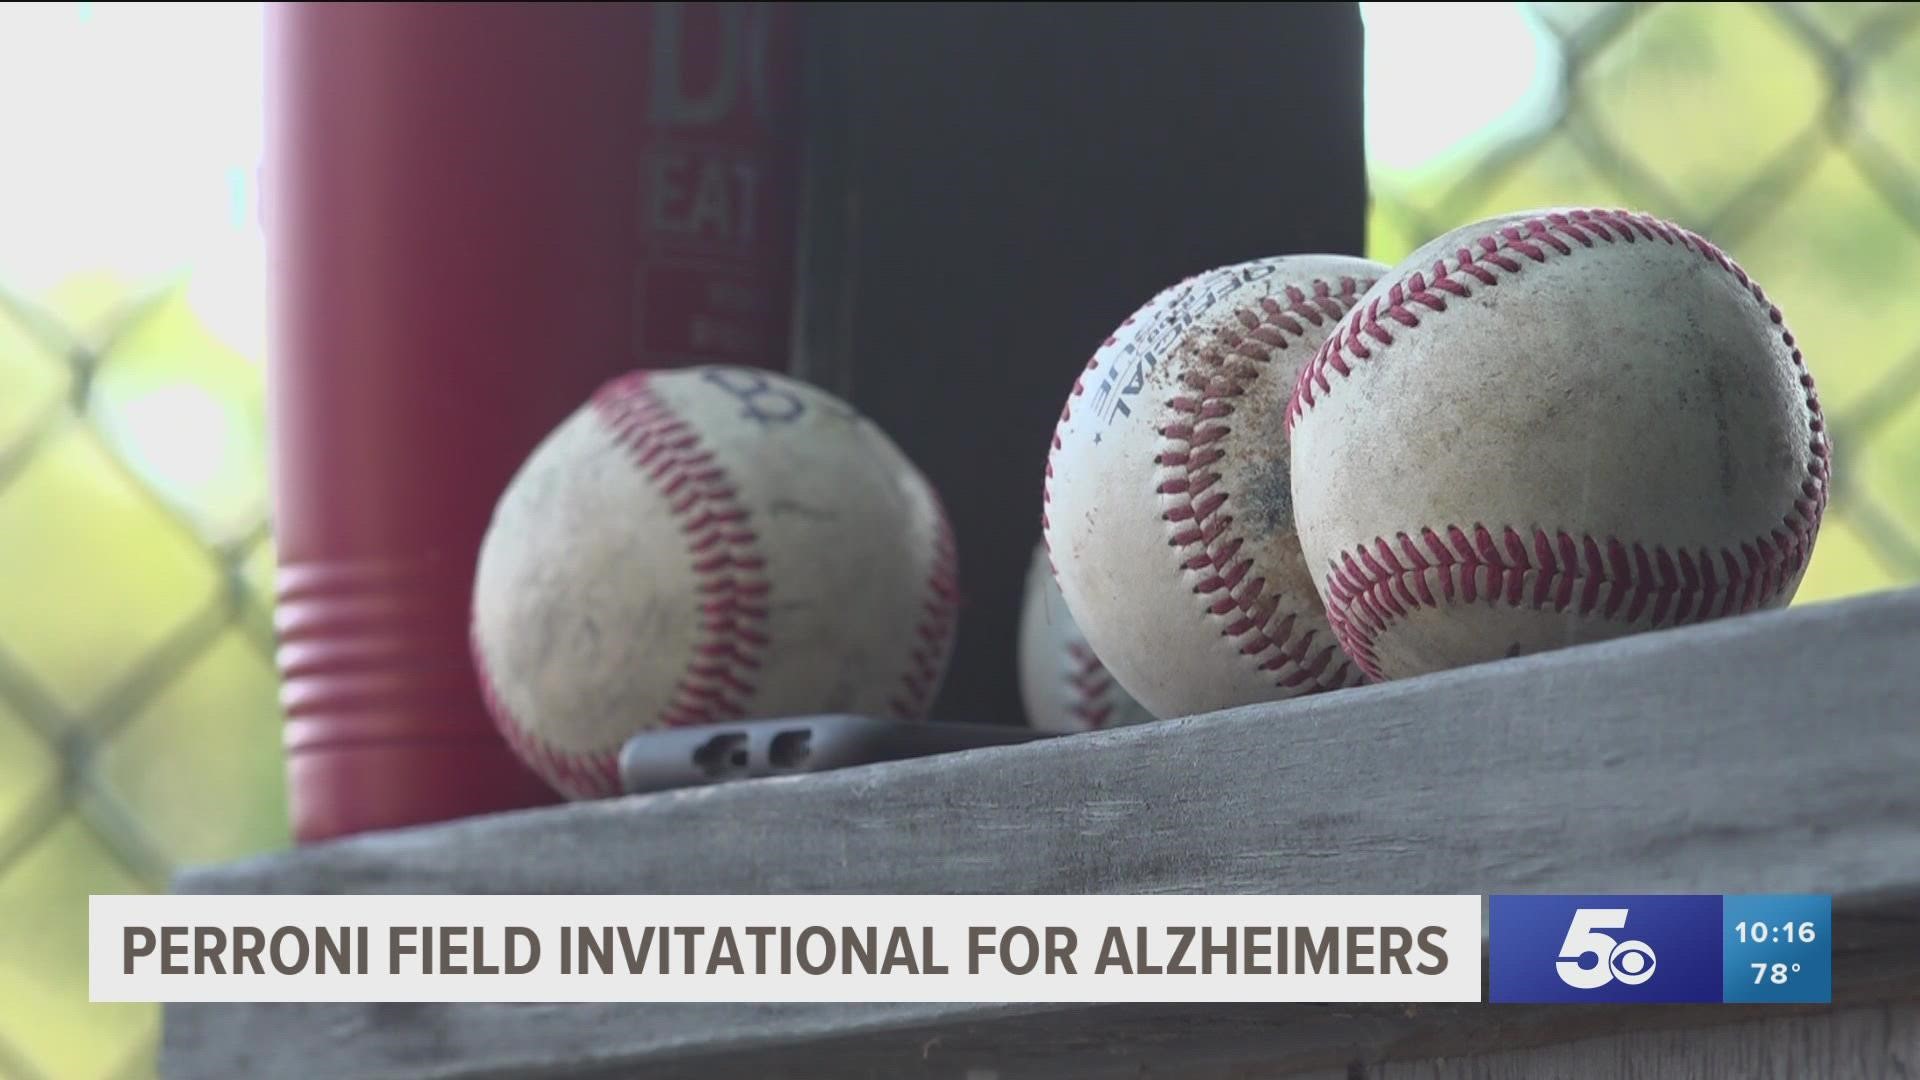 Perroni Field hosts its second annual invitational fundraising for the Alzheimer's Association.